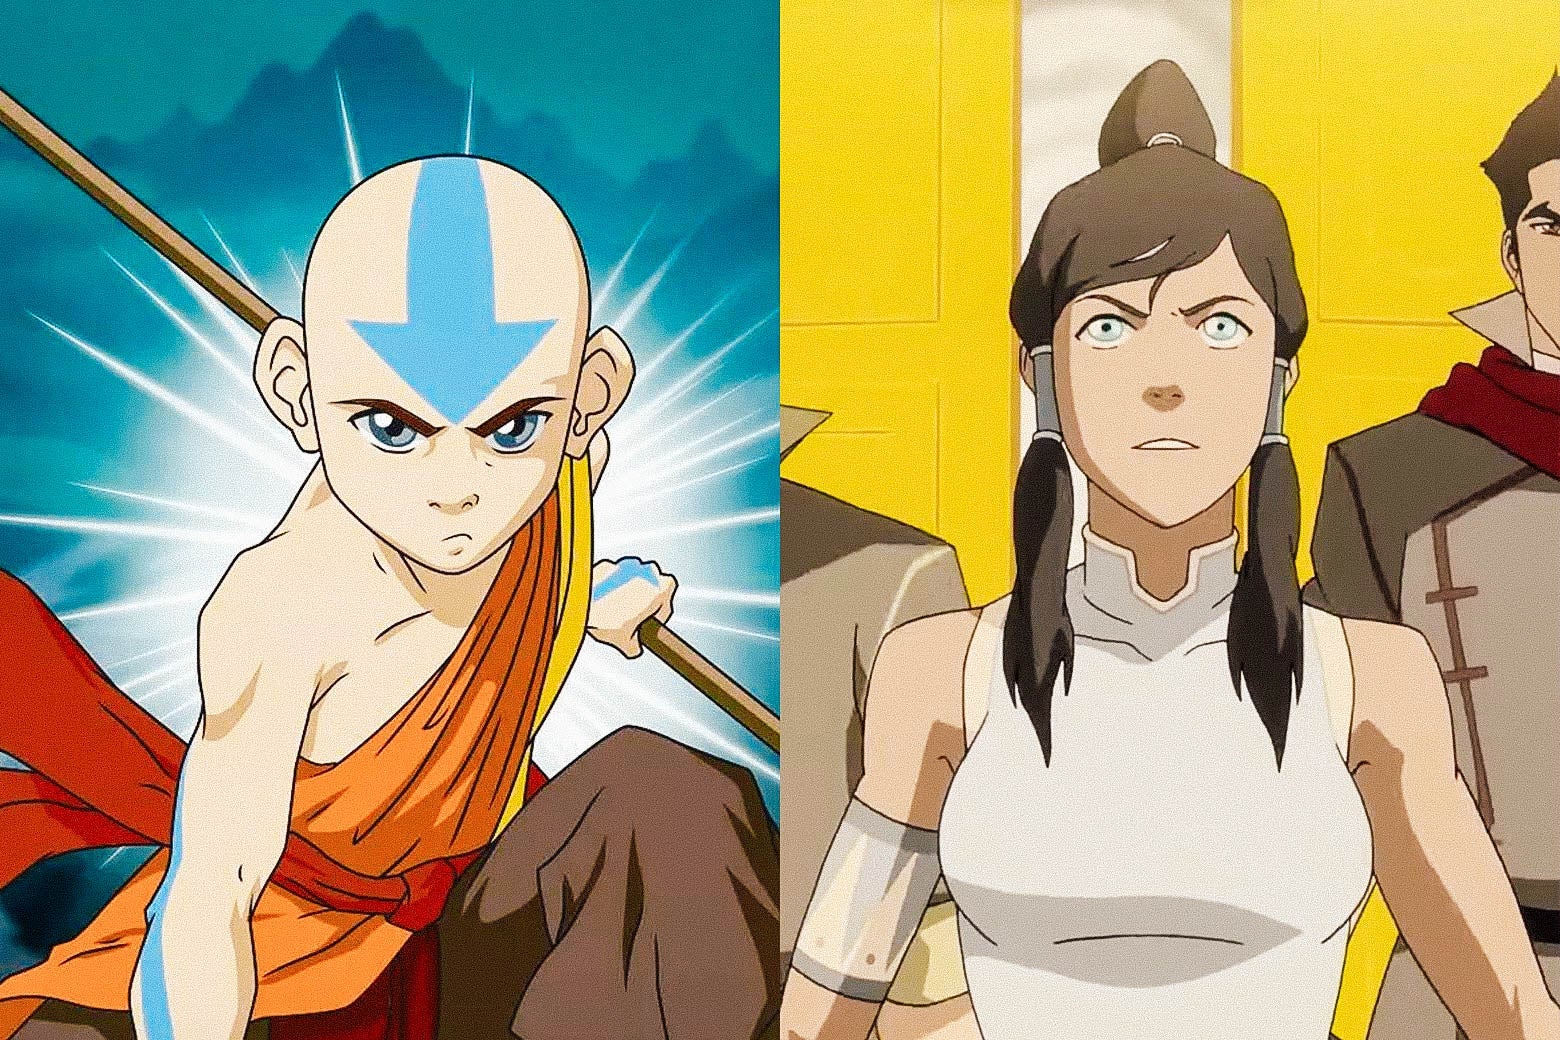 Avatar The Last Airbender Best Fight Scenes in the Series Ranked